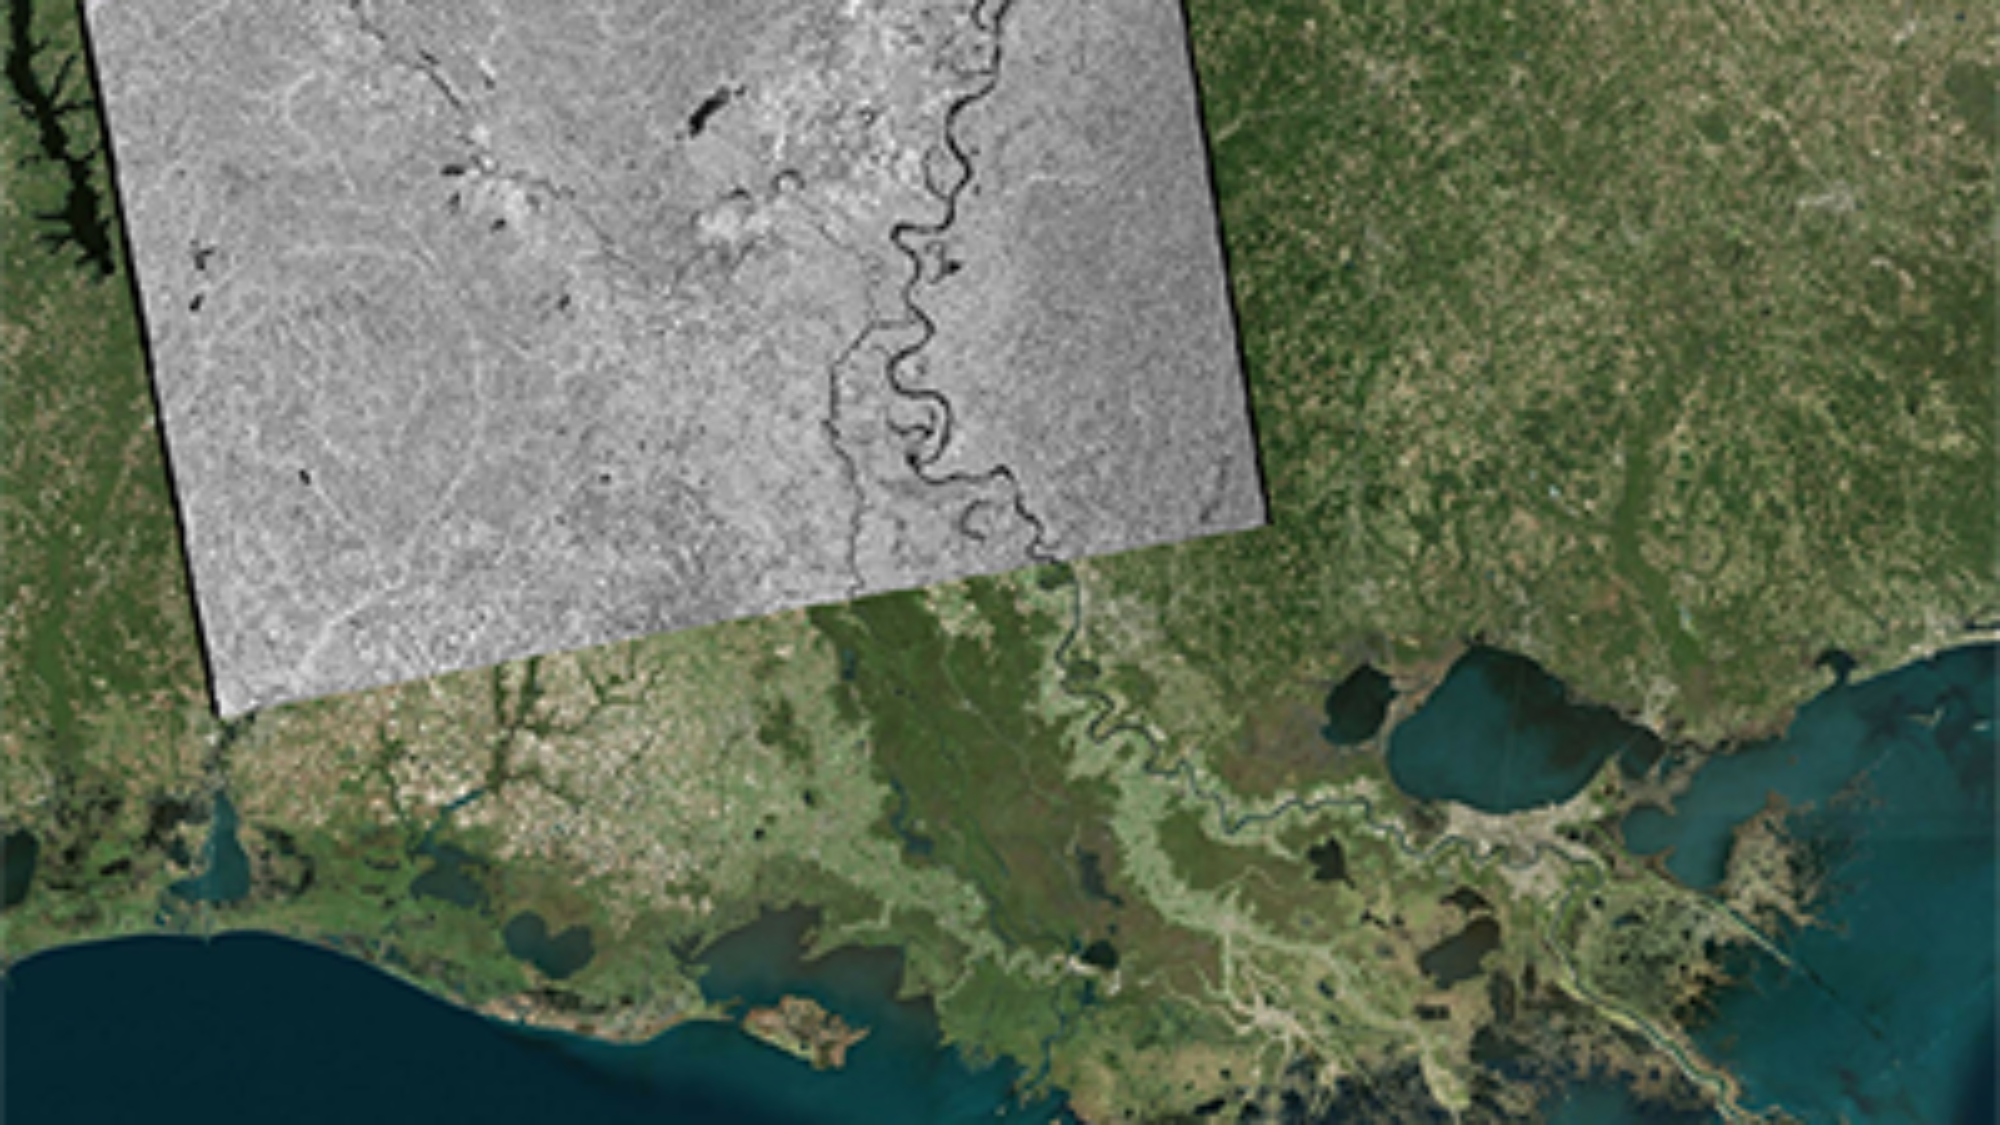 This Sentinel-1 image capturing the Mississippi River has been processed into a GIS-compatible format and imported for ease of use. Credit: Copernicus Sentinel data 2017, processed by ESA.